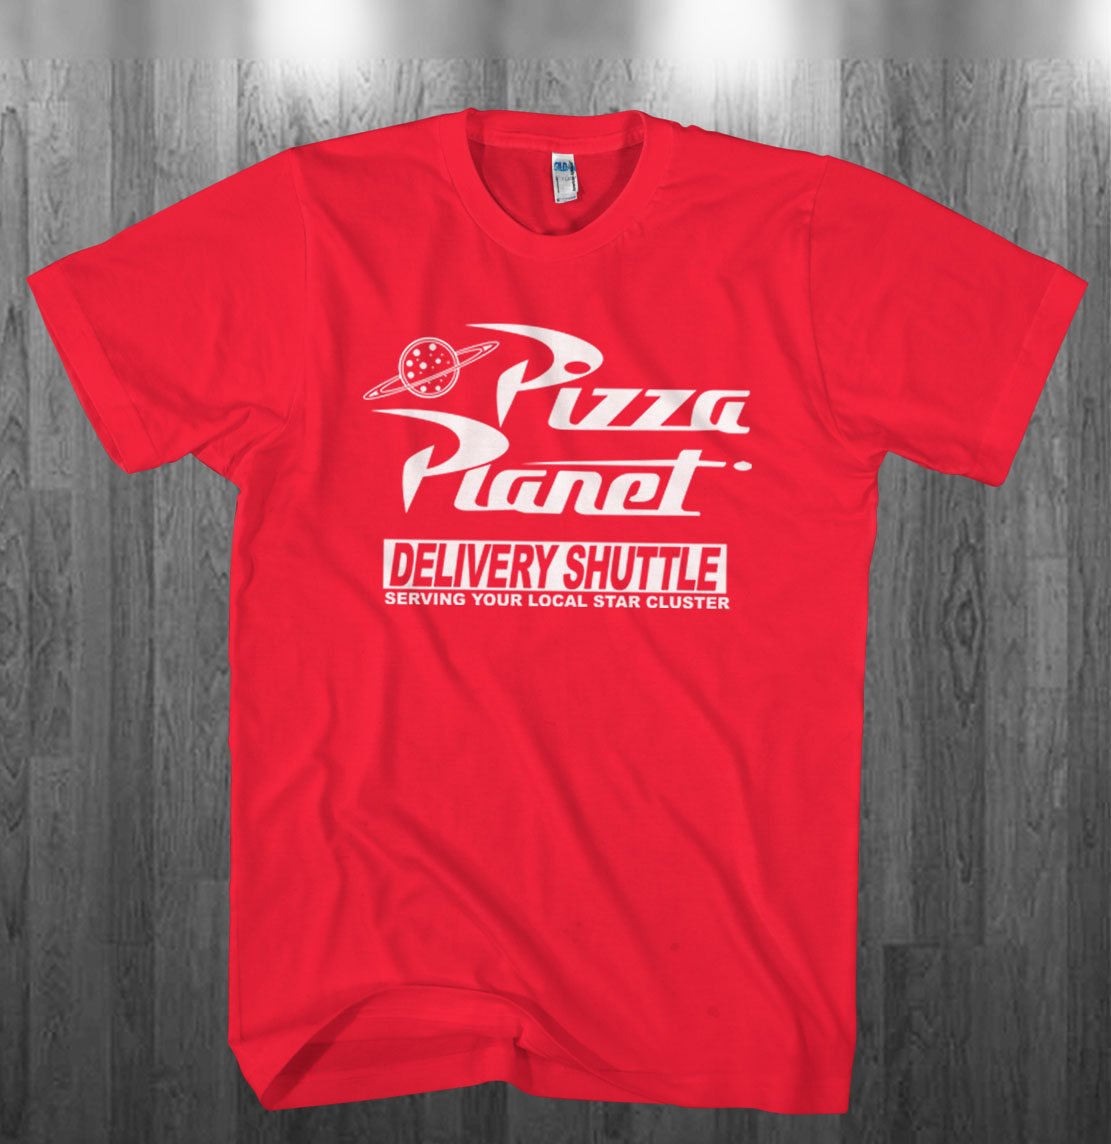 Pizza Planet Shirt - Vacation T-Shirt - Retro Television And Video - 1990s Garment-Red-S-